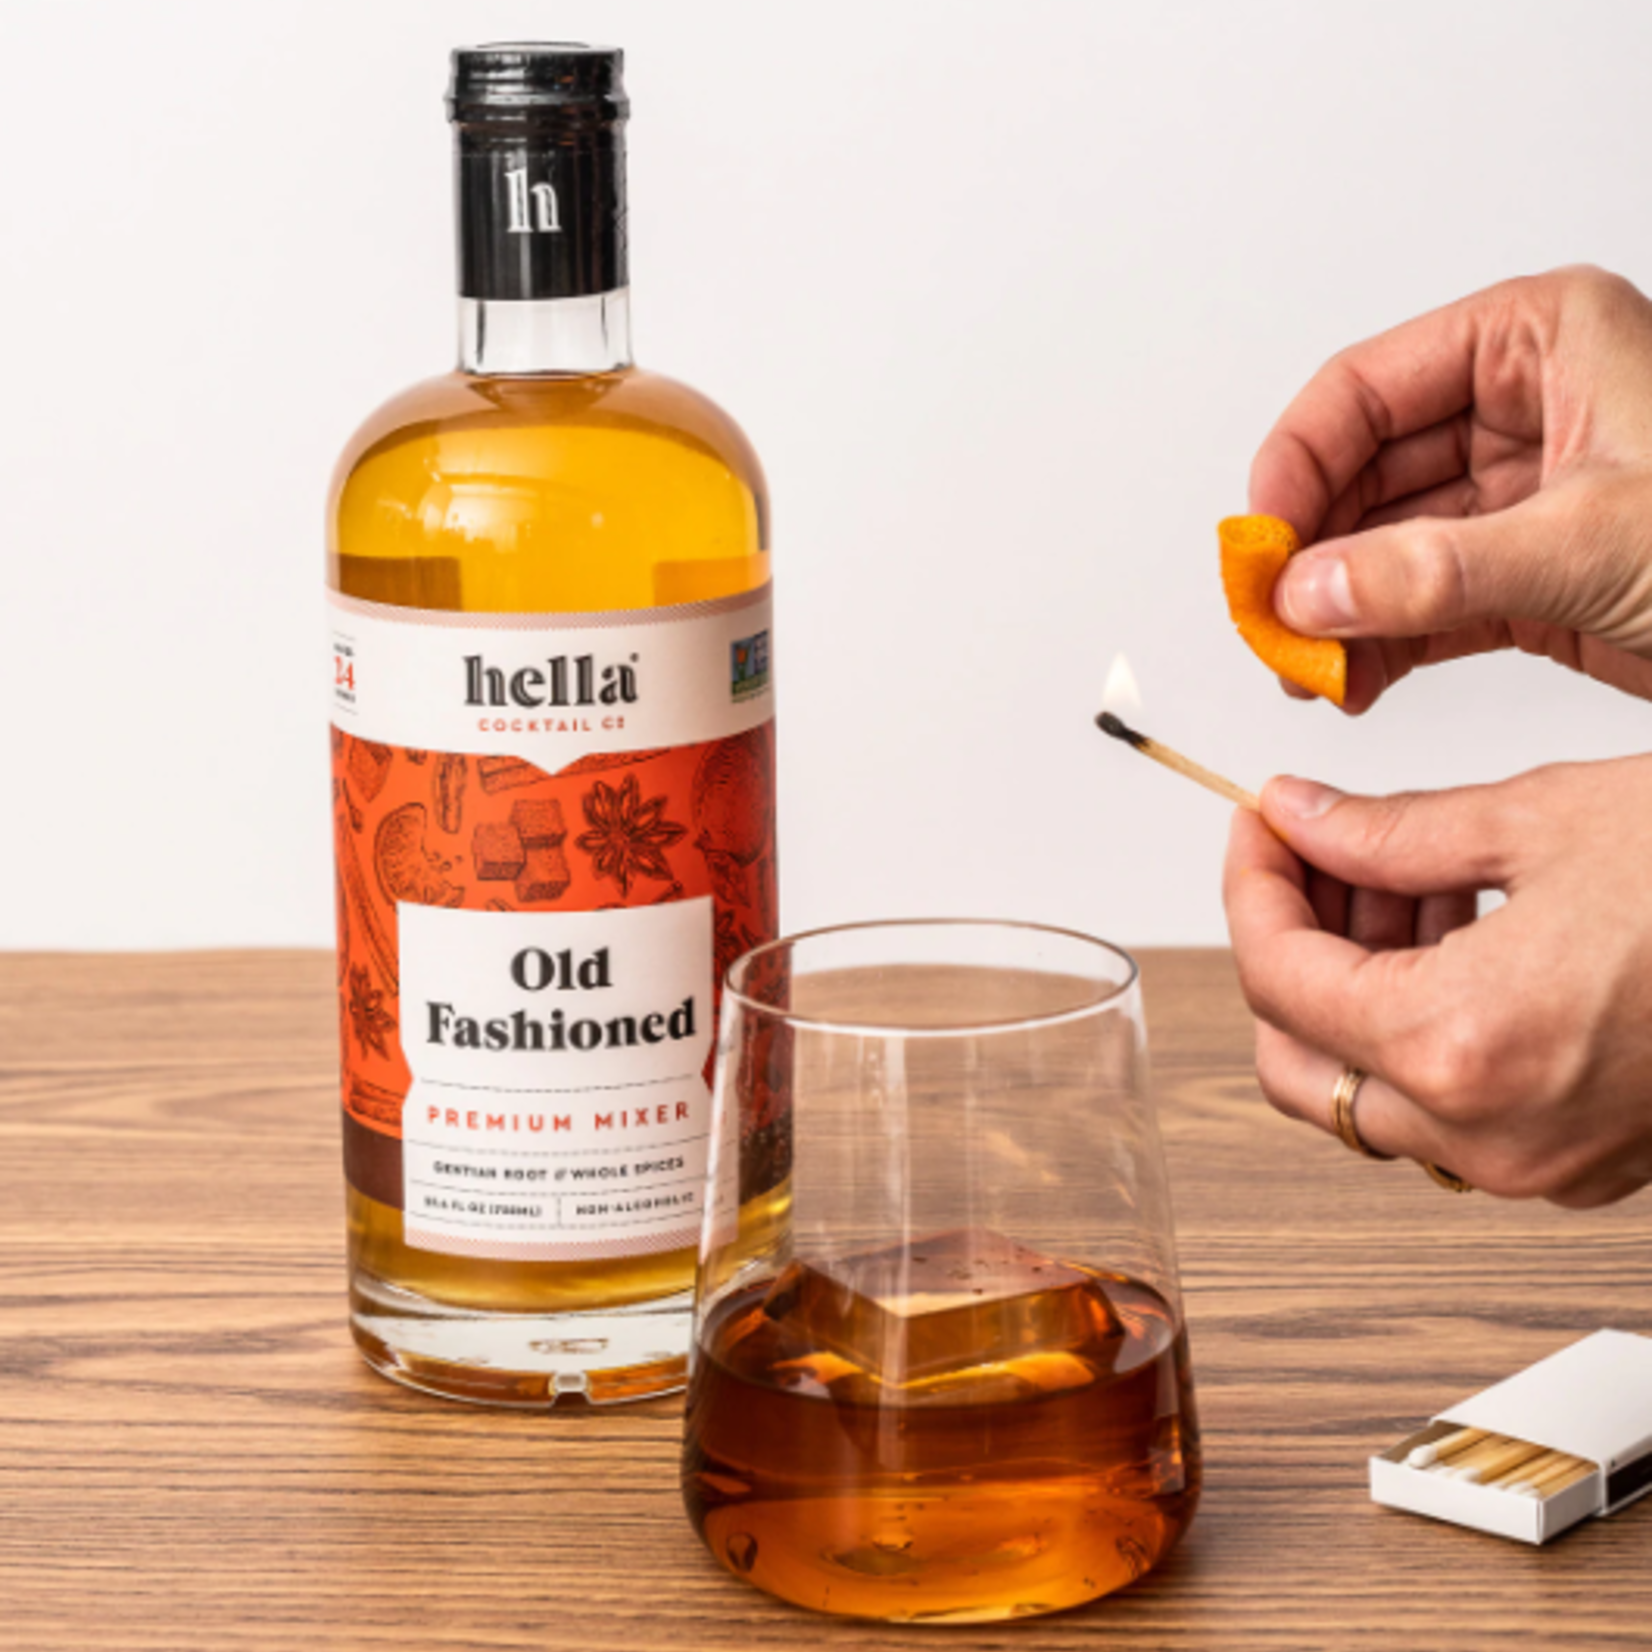 Hella Cocktail Co Old Fashioned Mix 750mL